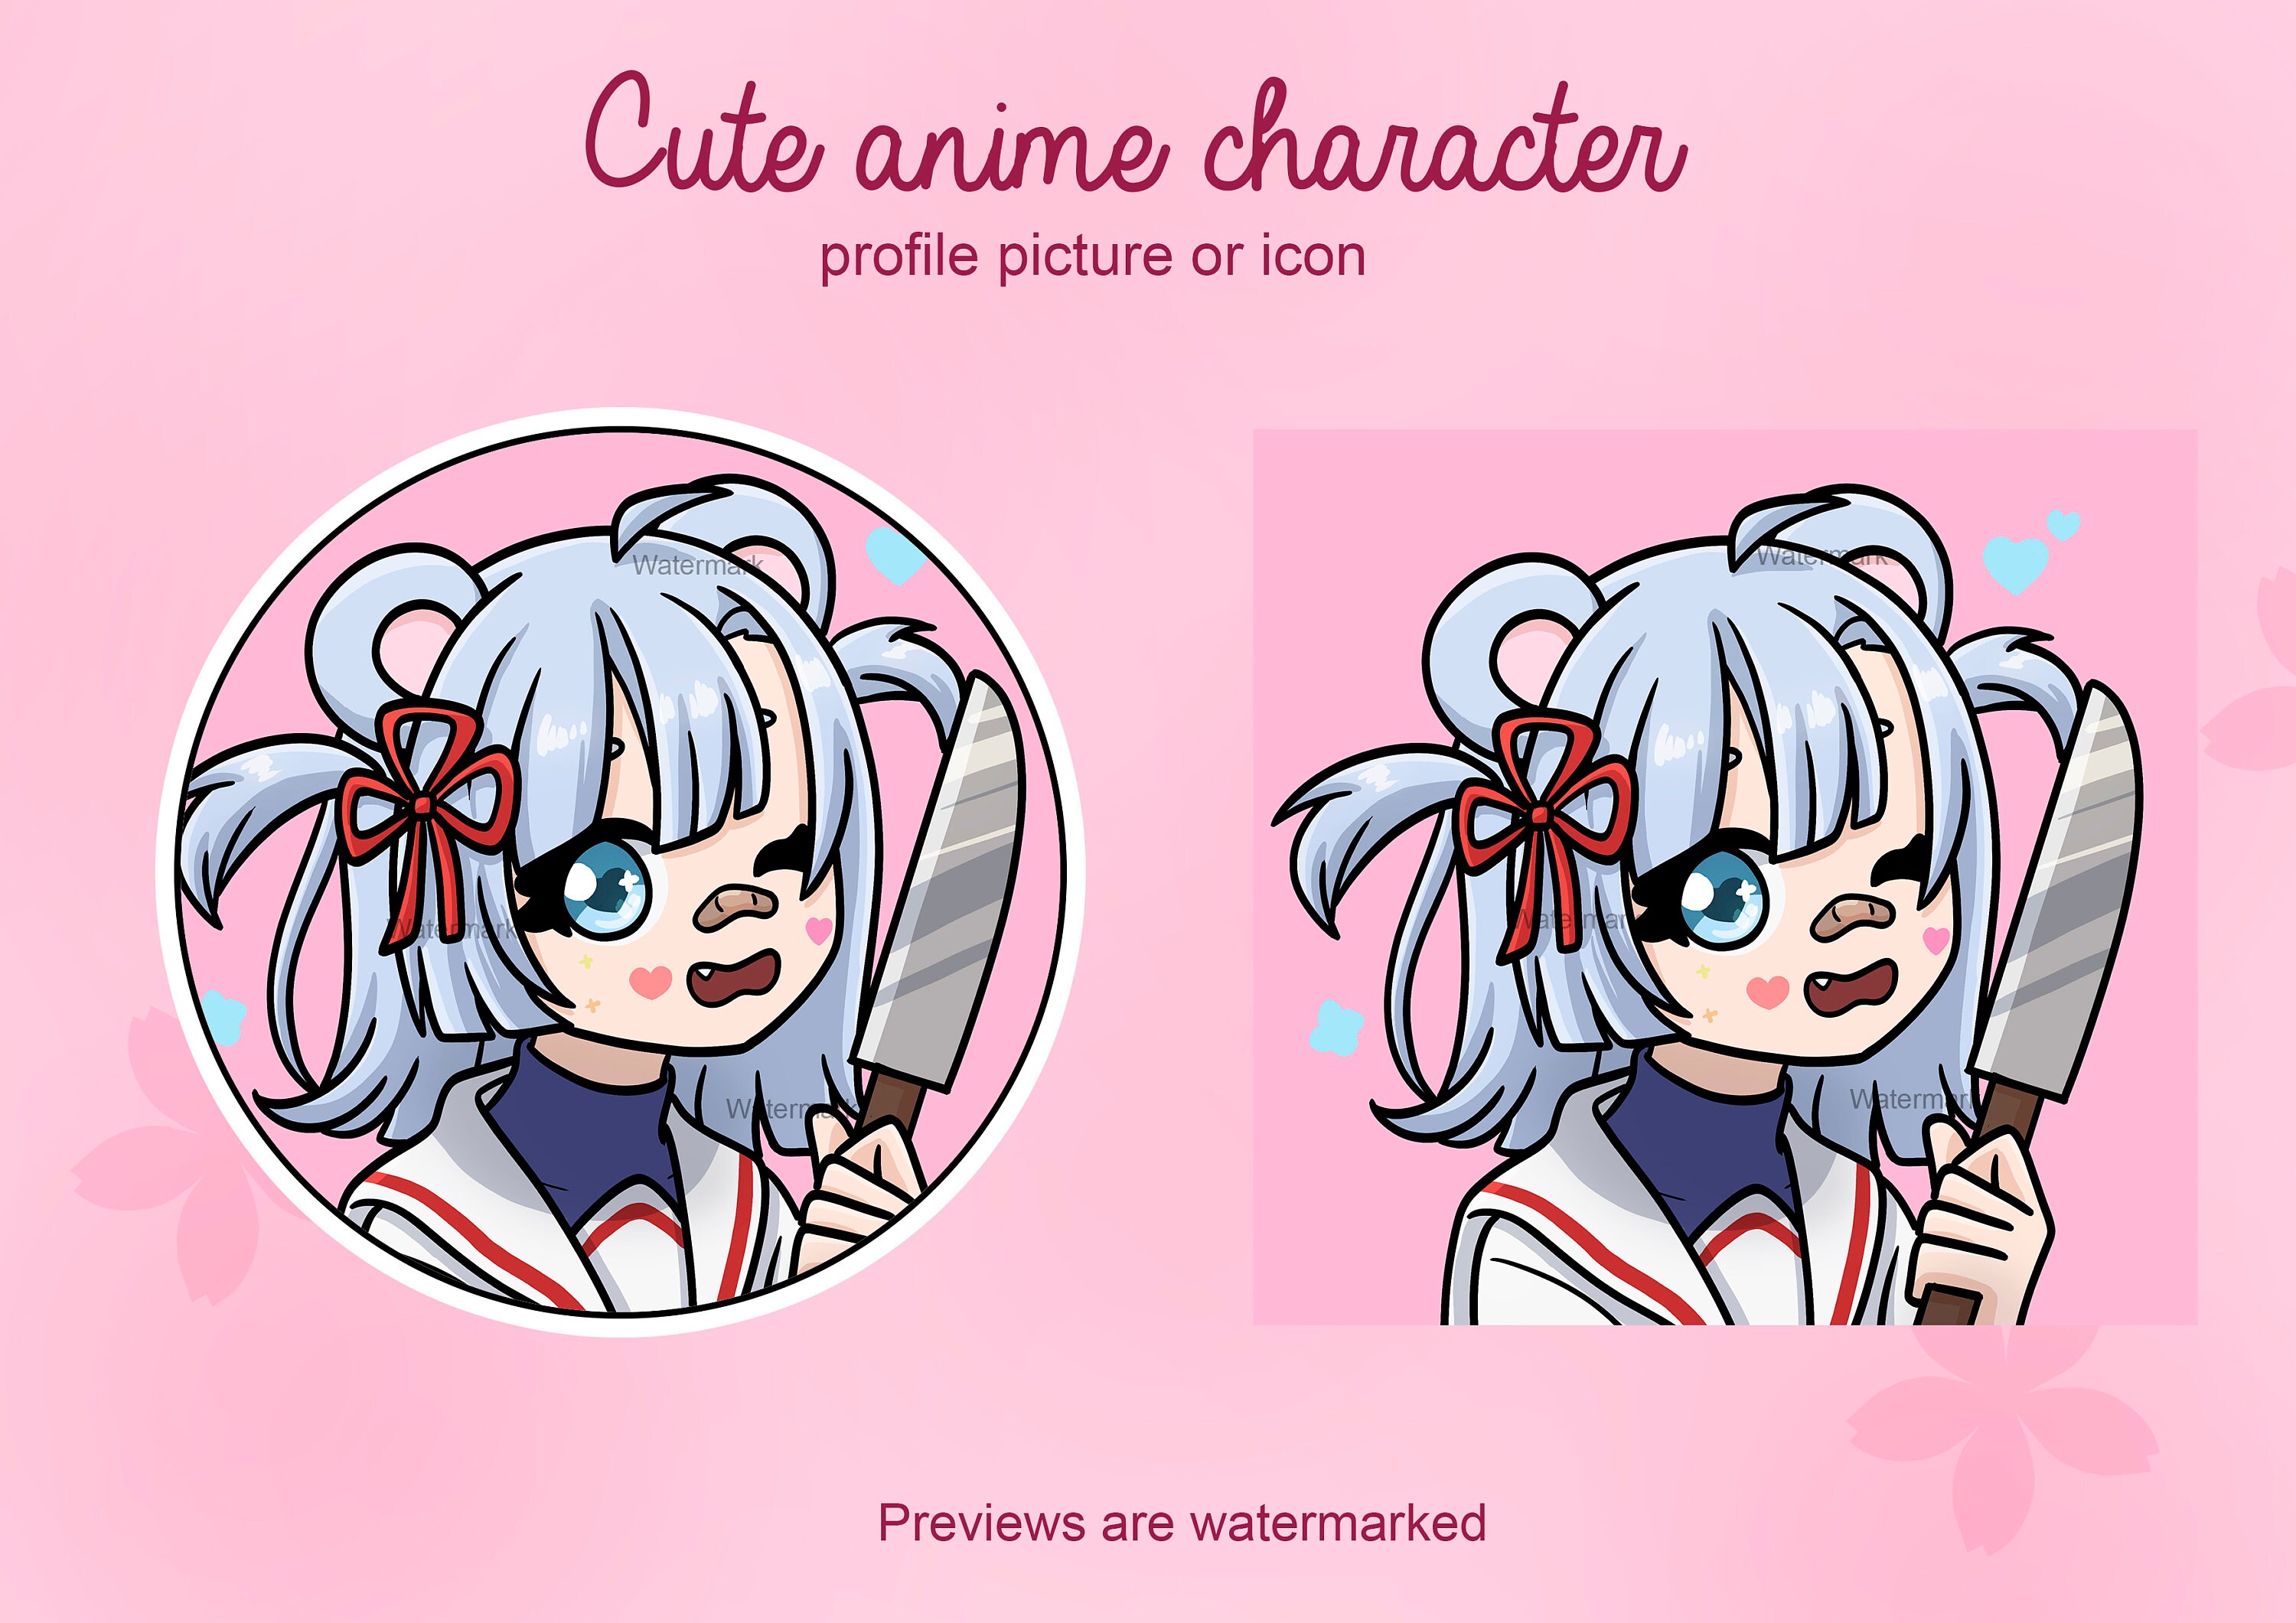 Some cute girl profile pictures for you all 💖✨